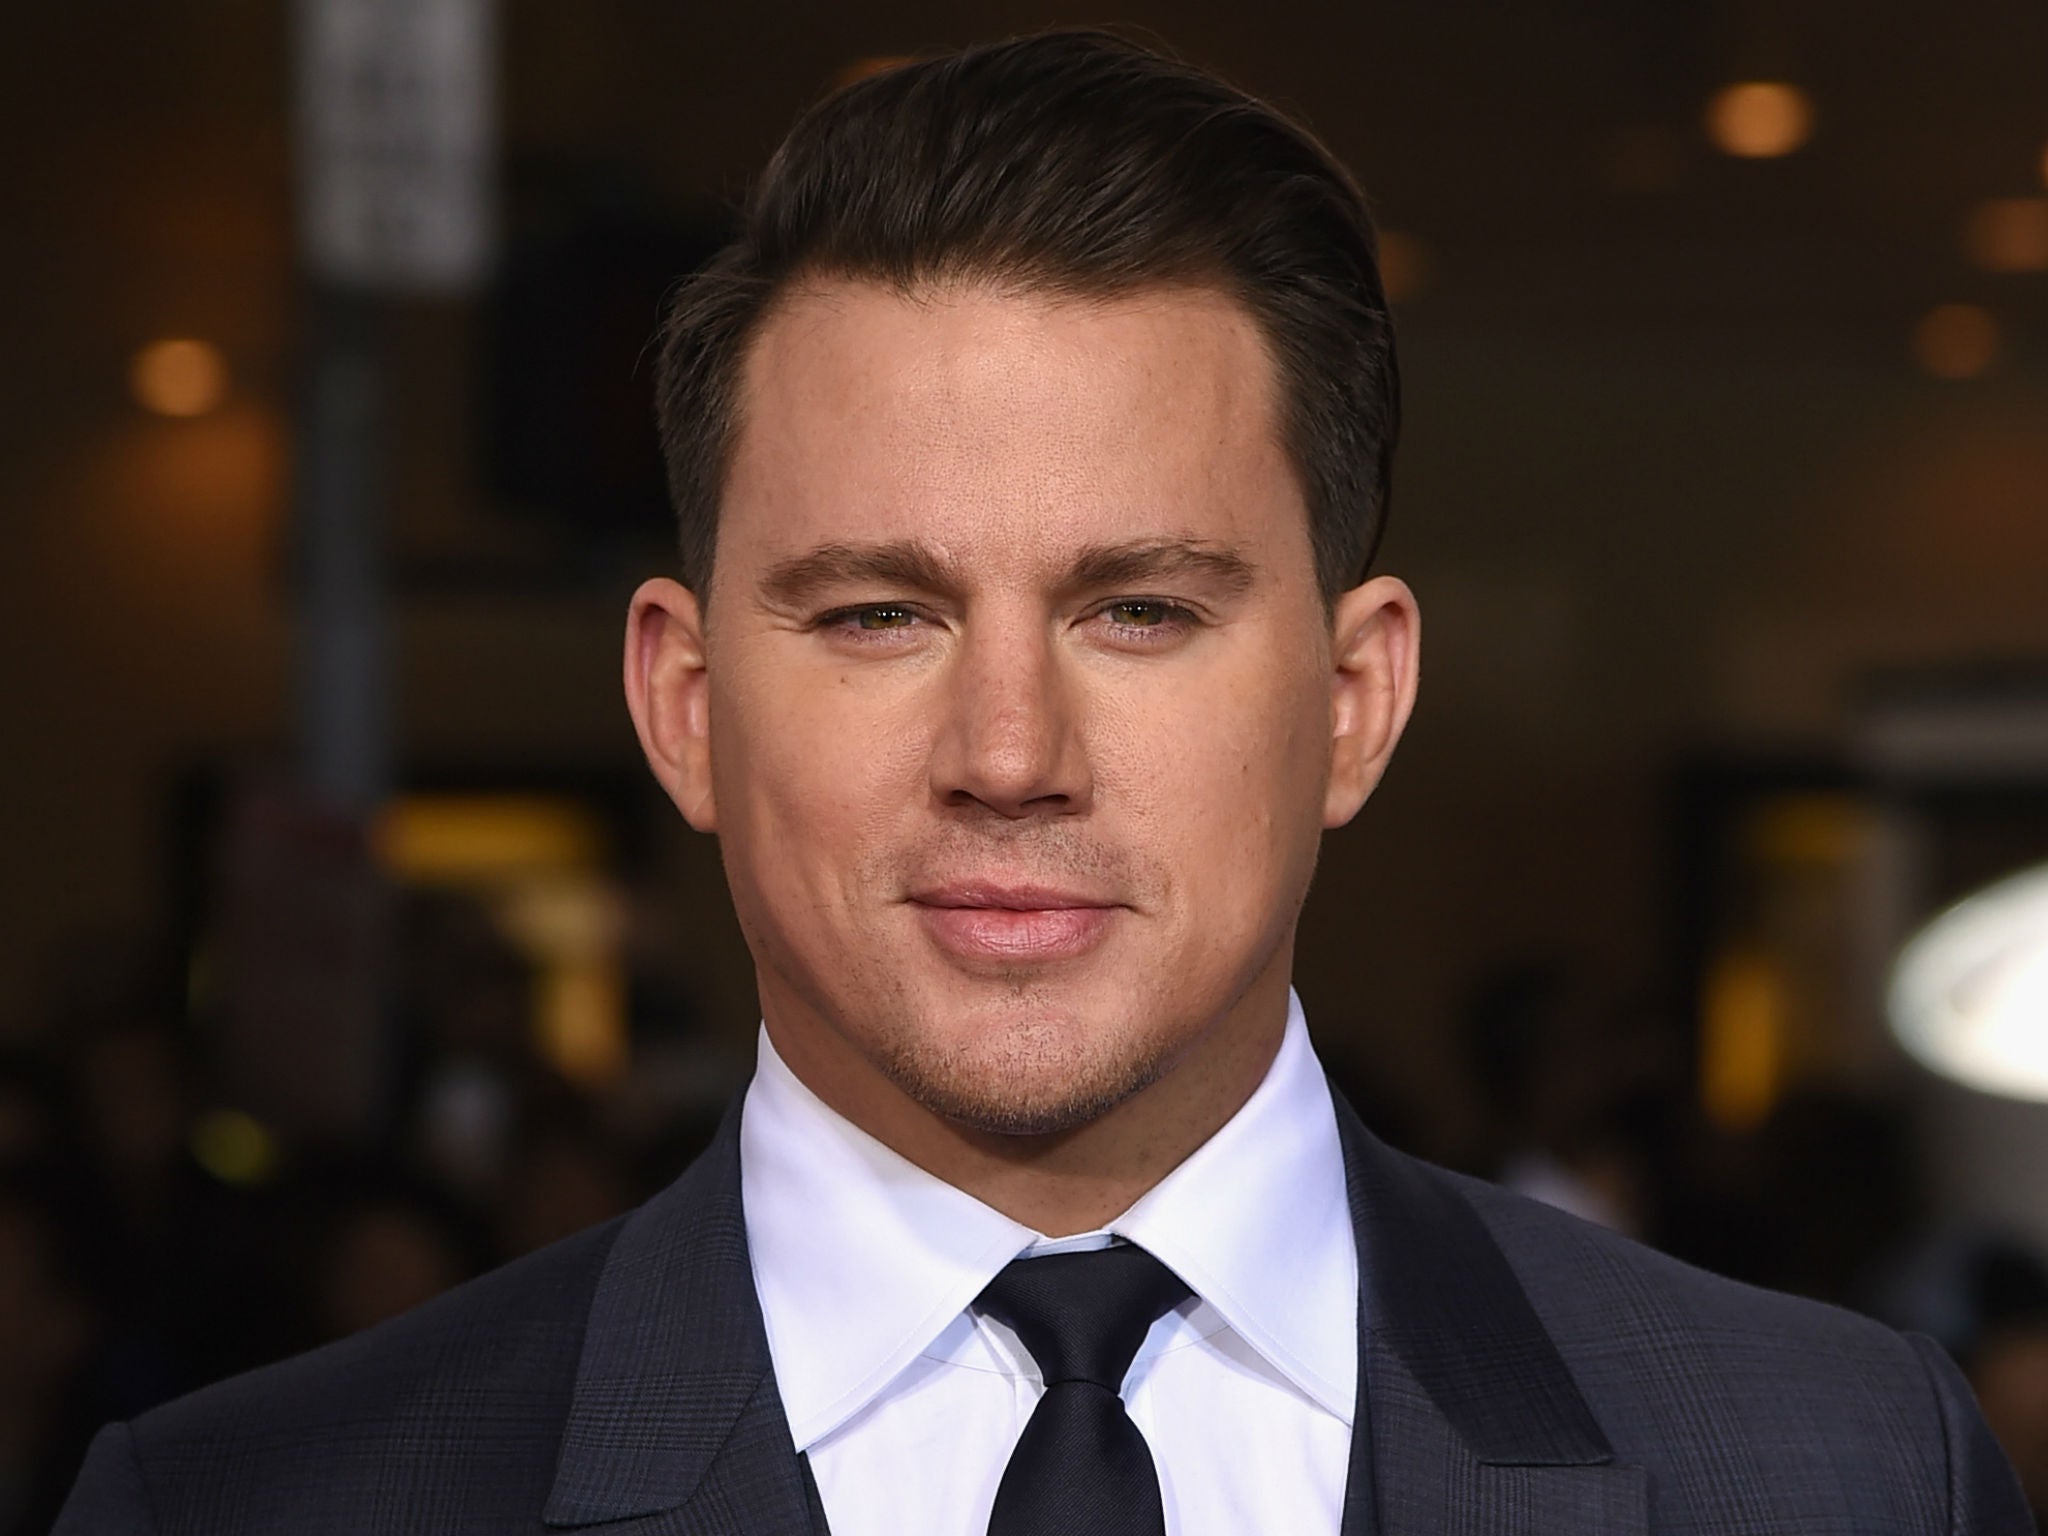 Channing Tatum is best known for his roles in comedy and action movies